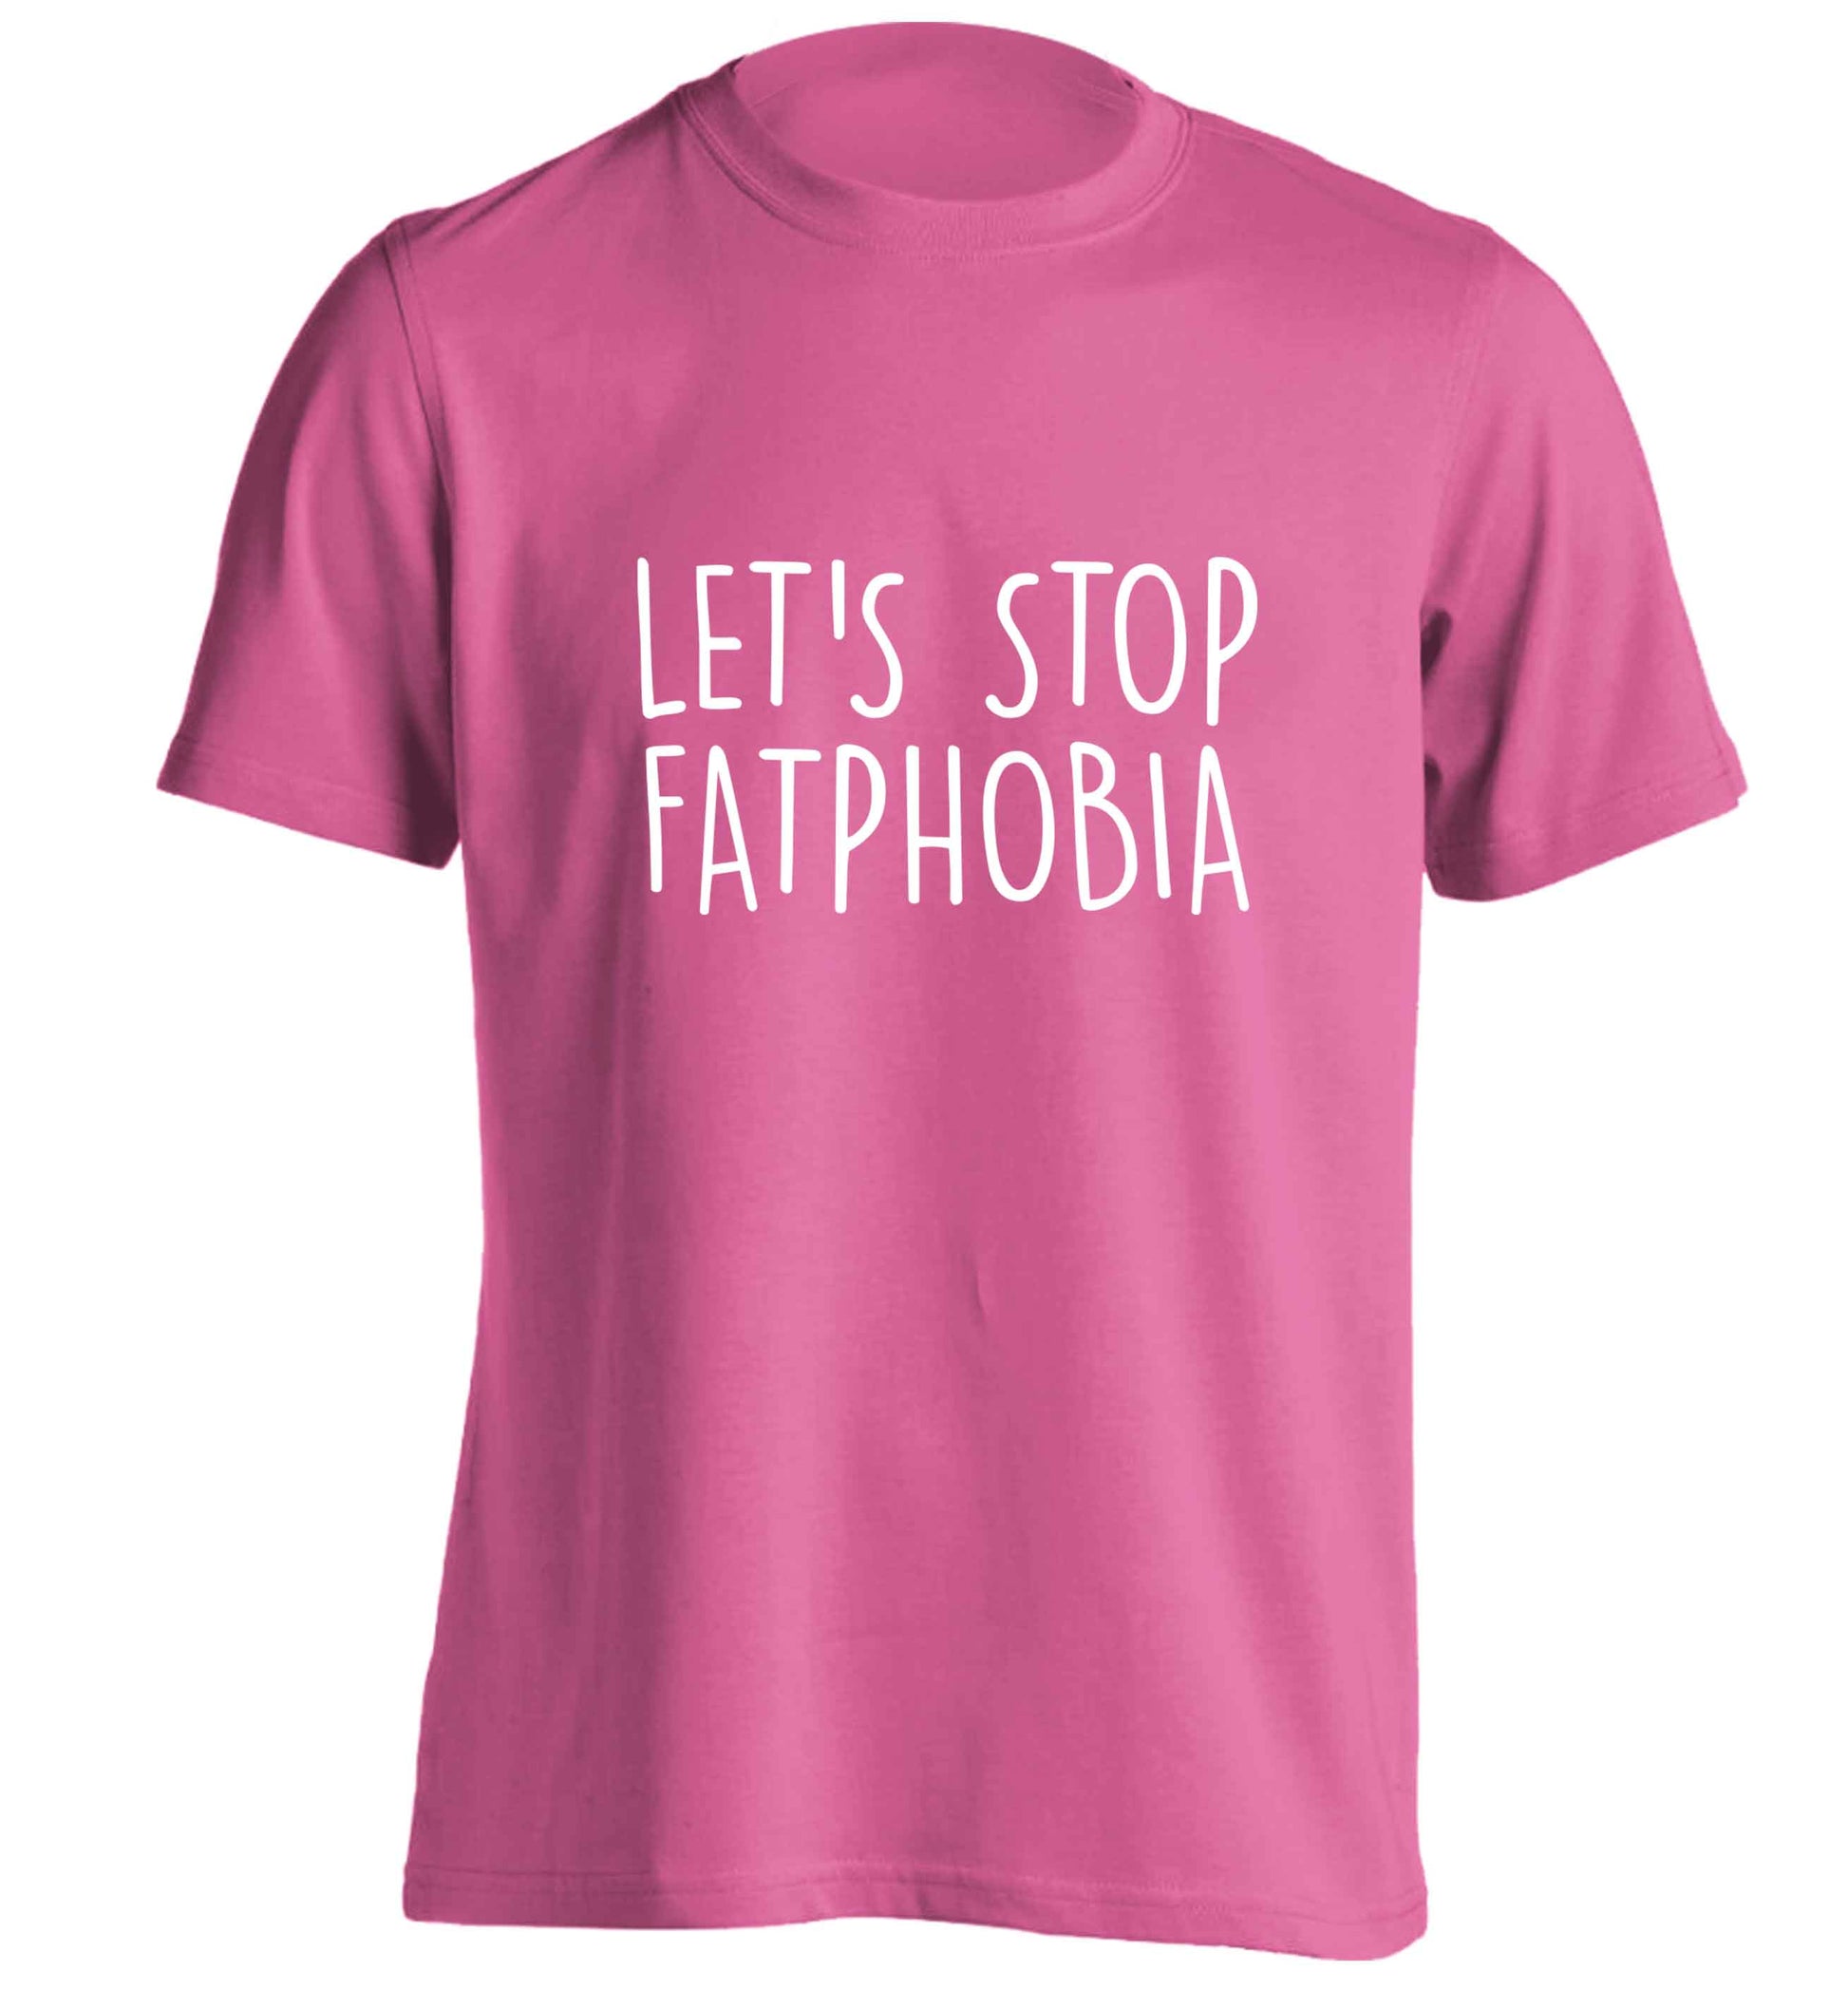 Let's stop fatphobia adults unisex pink Tshirt 2XL